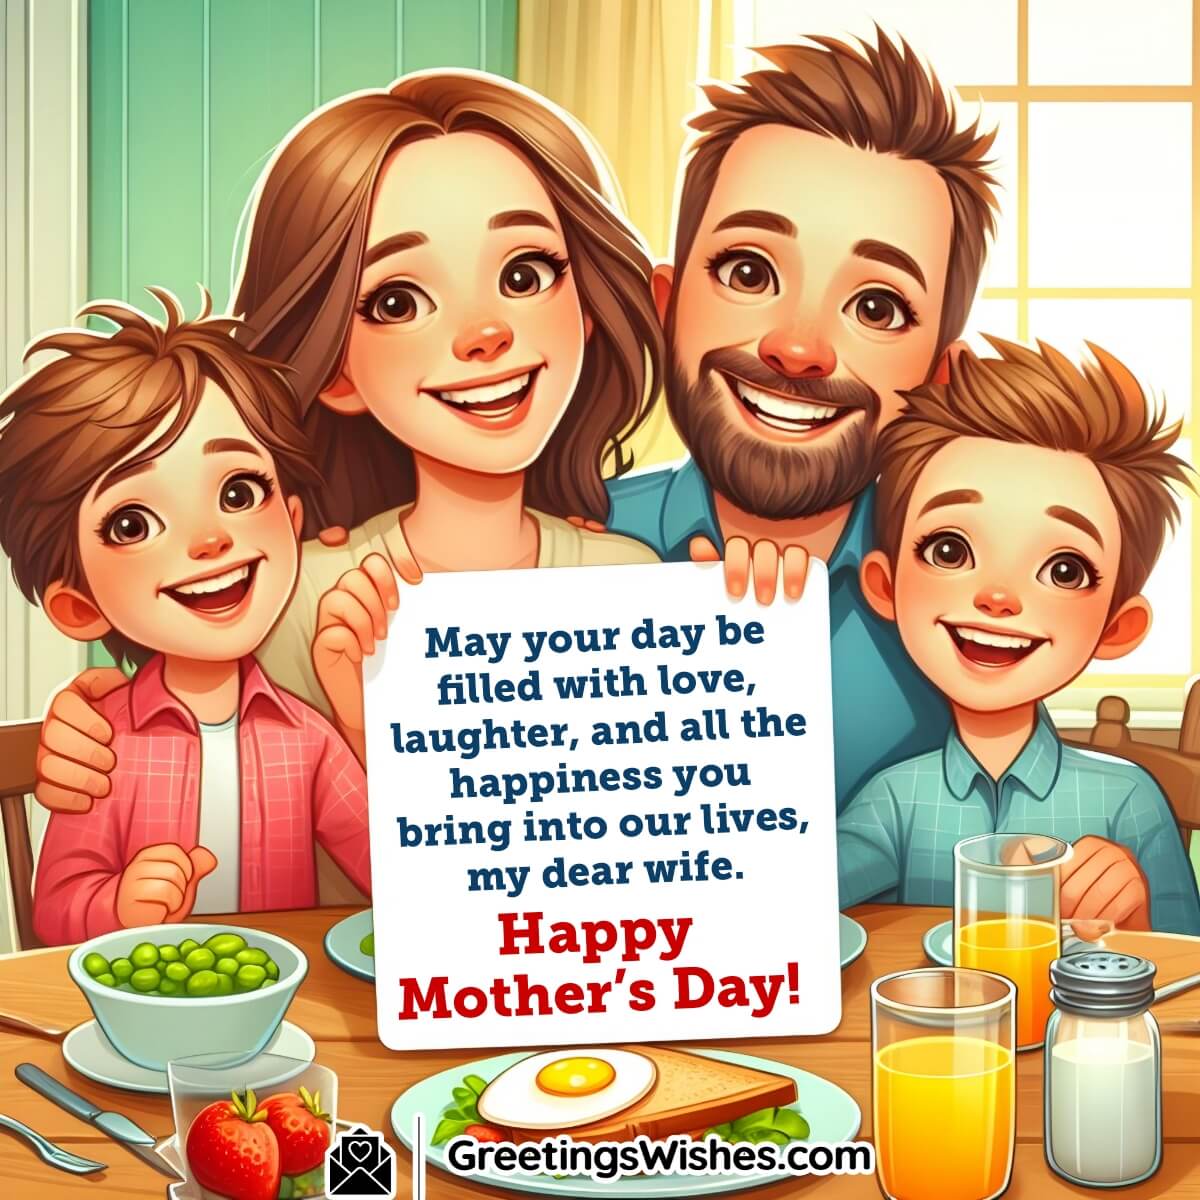 Happy Mother’s Day Wish For Wife